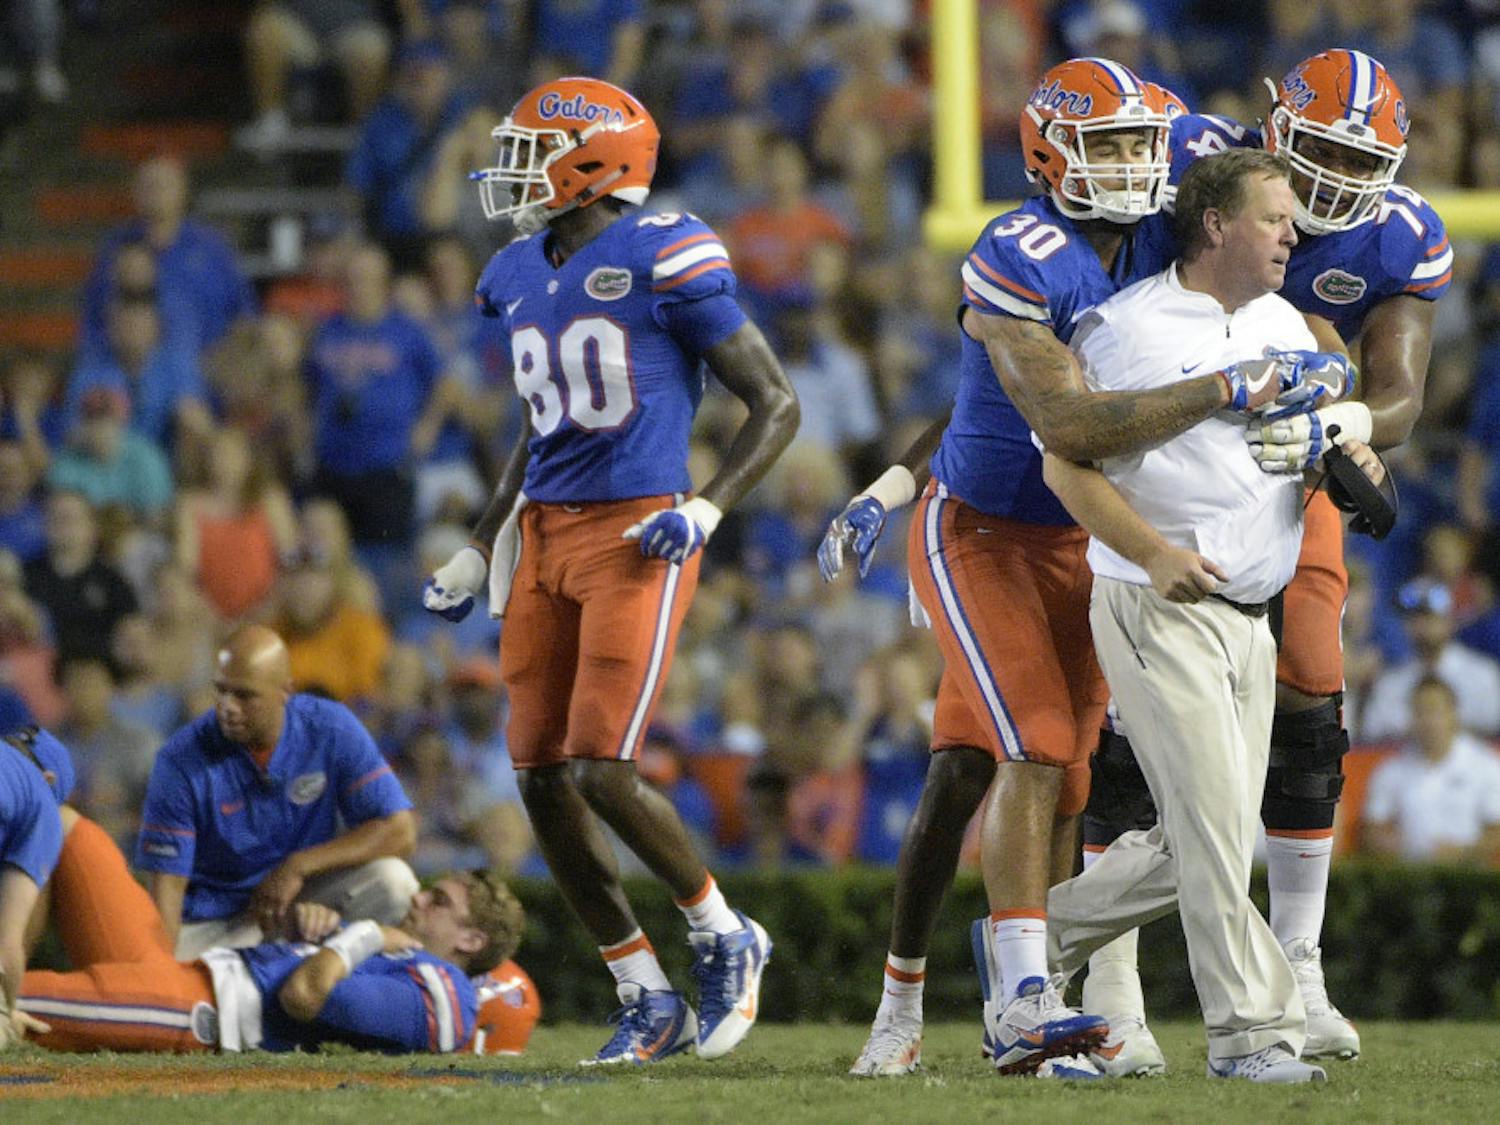 Florida coach Jim McElwain is restrained by tight end DeAndre Goolsby (30) and offensive lineman Fred Johnson (74) after McElwain showed his displeasure after quarterback Luke Del Rio, left, was knocked out of the game during the second half of an NCAA college football game against North Texas in Gainesville, Fla., Saturday, Sept. 17, 2016. North Texas was penalized for roughing the passer. (AP Photo/Phelan M. Ebenhack)